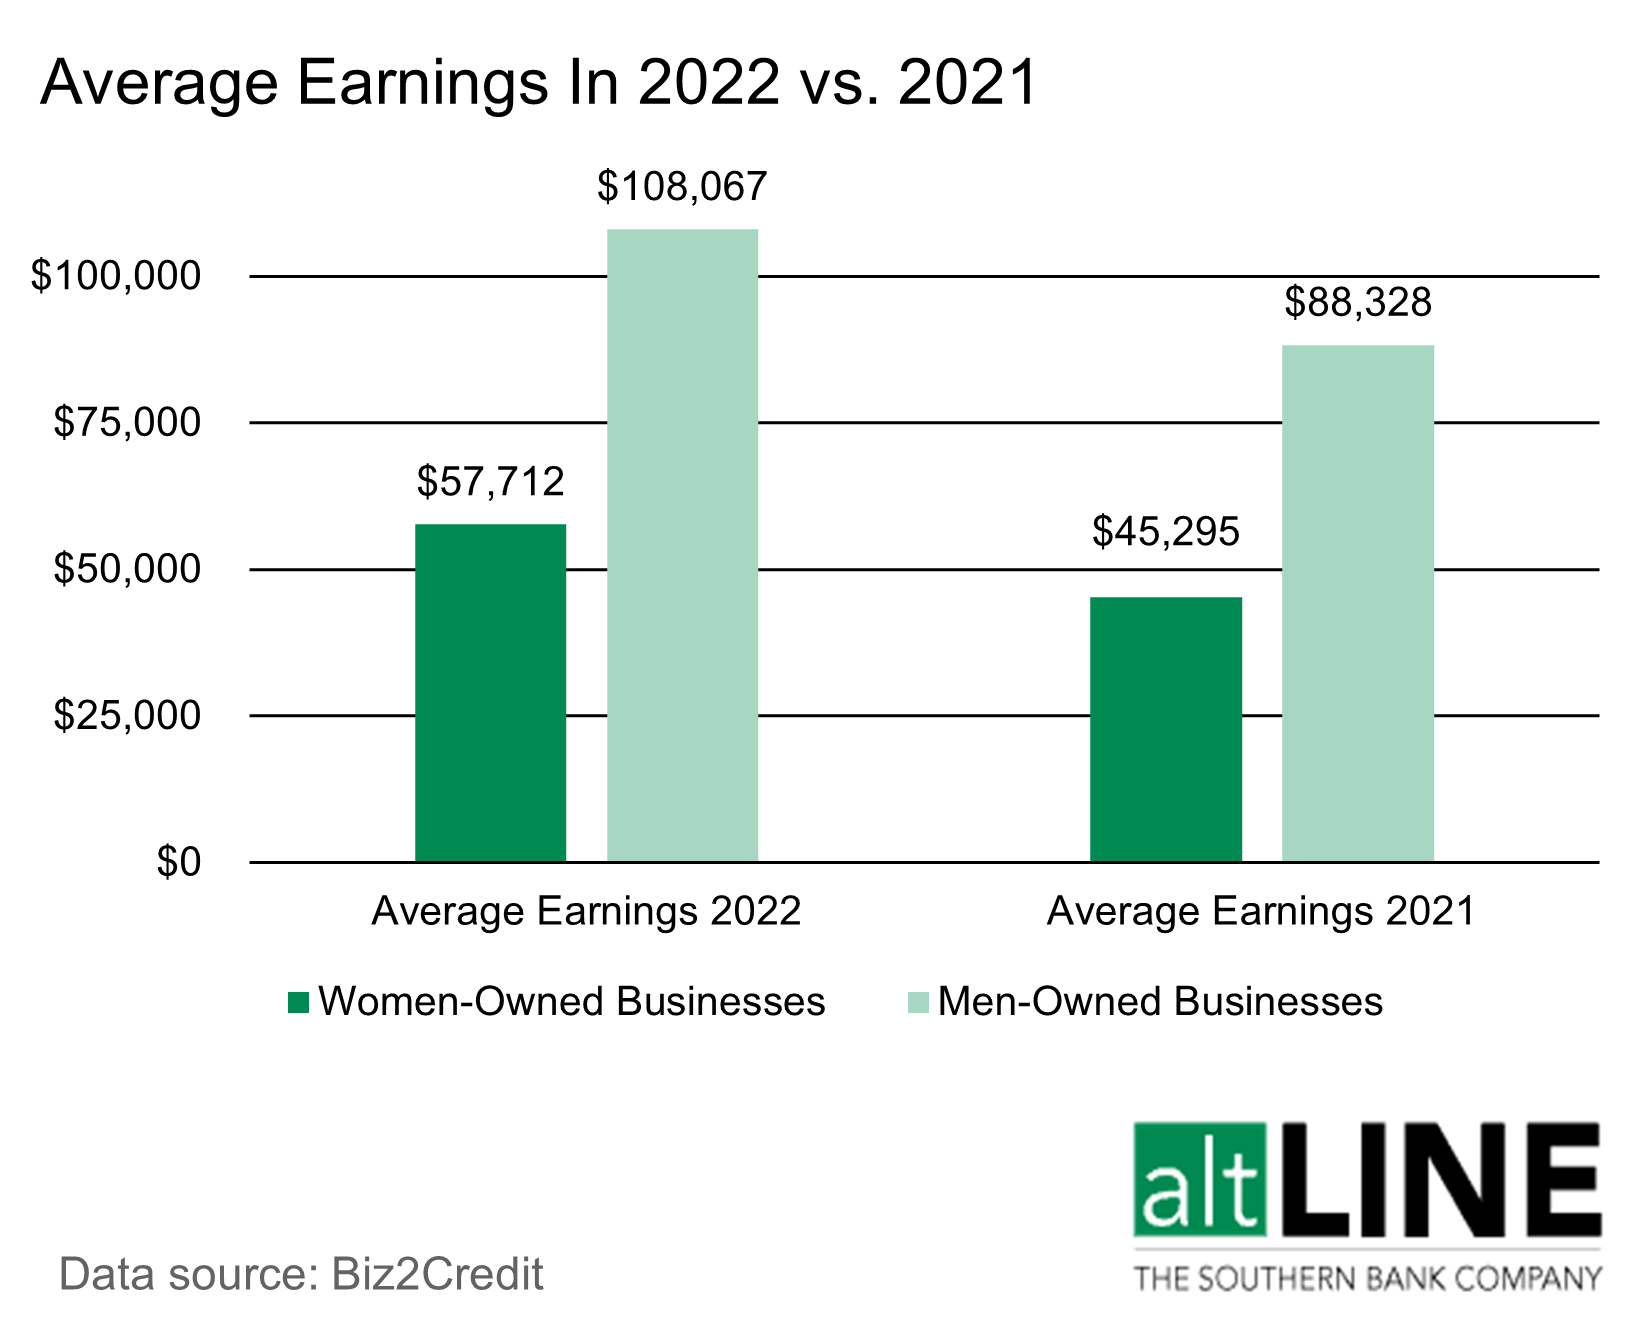 chart showing the average earnings of women and men-owned businesses for 2022 vs 2021